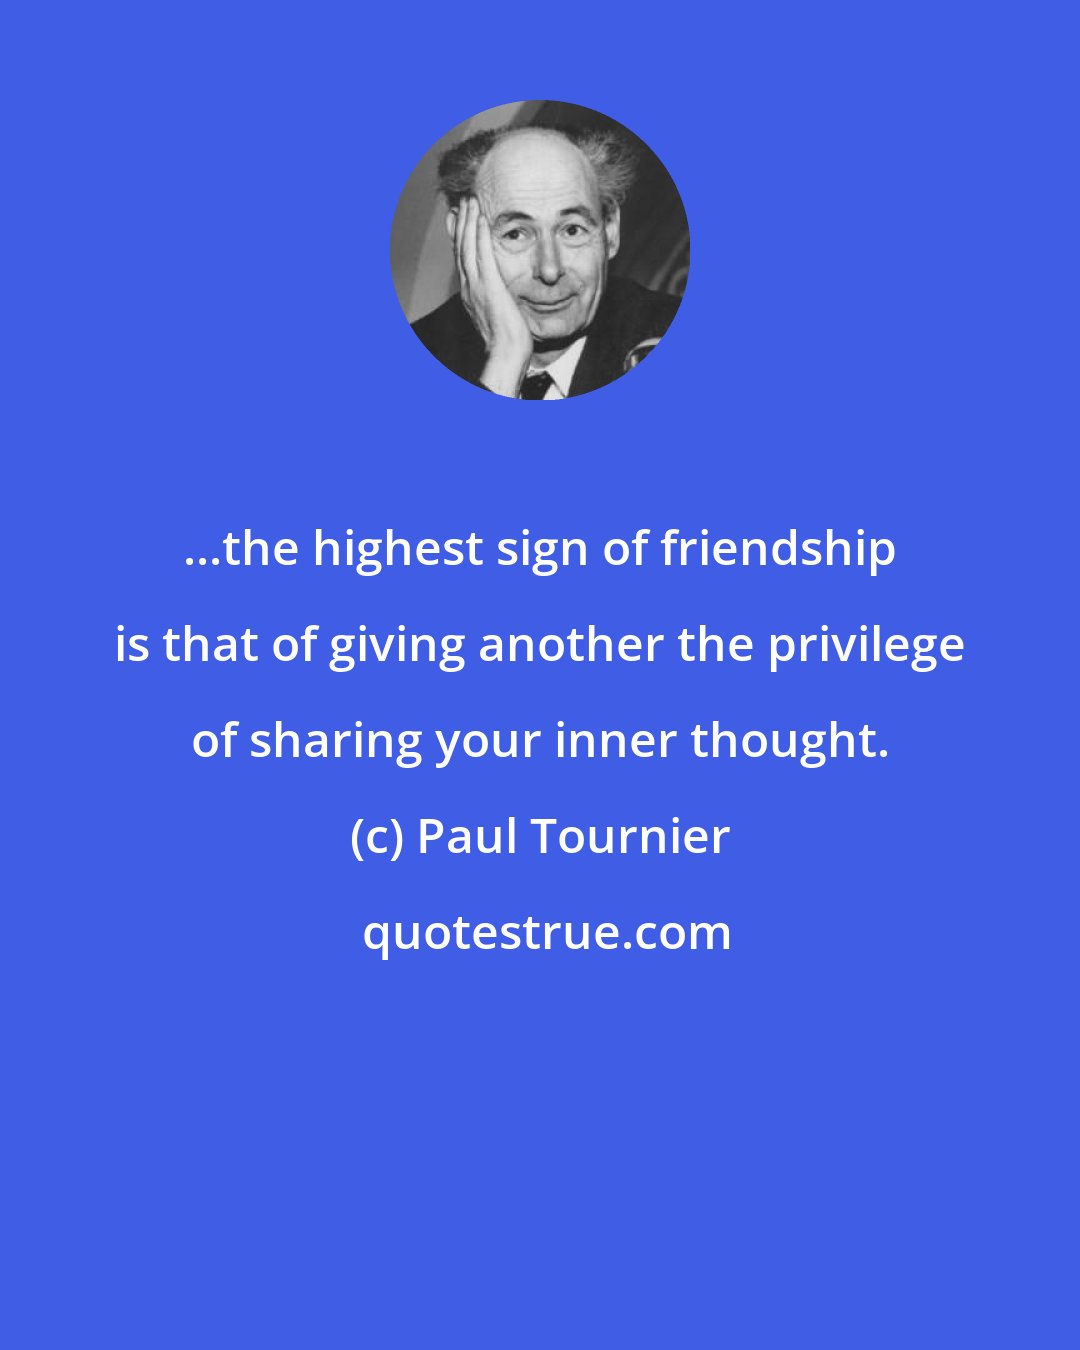 Paul Tournier: ...the highest sign of friendship is that of giving another the privilege of sharing your inner thought.